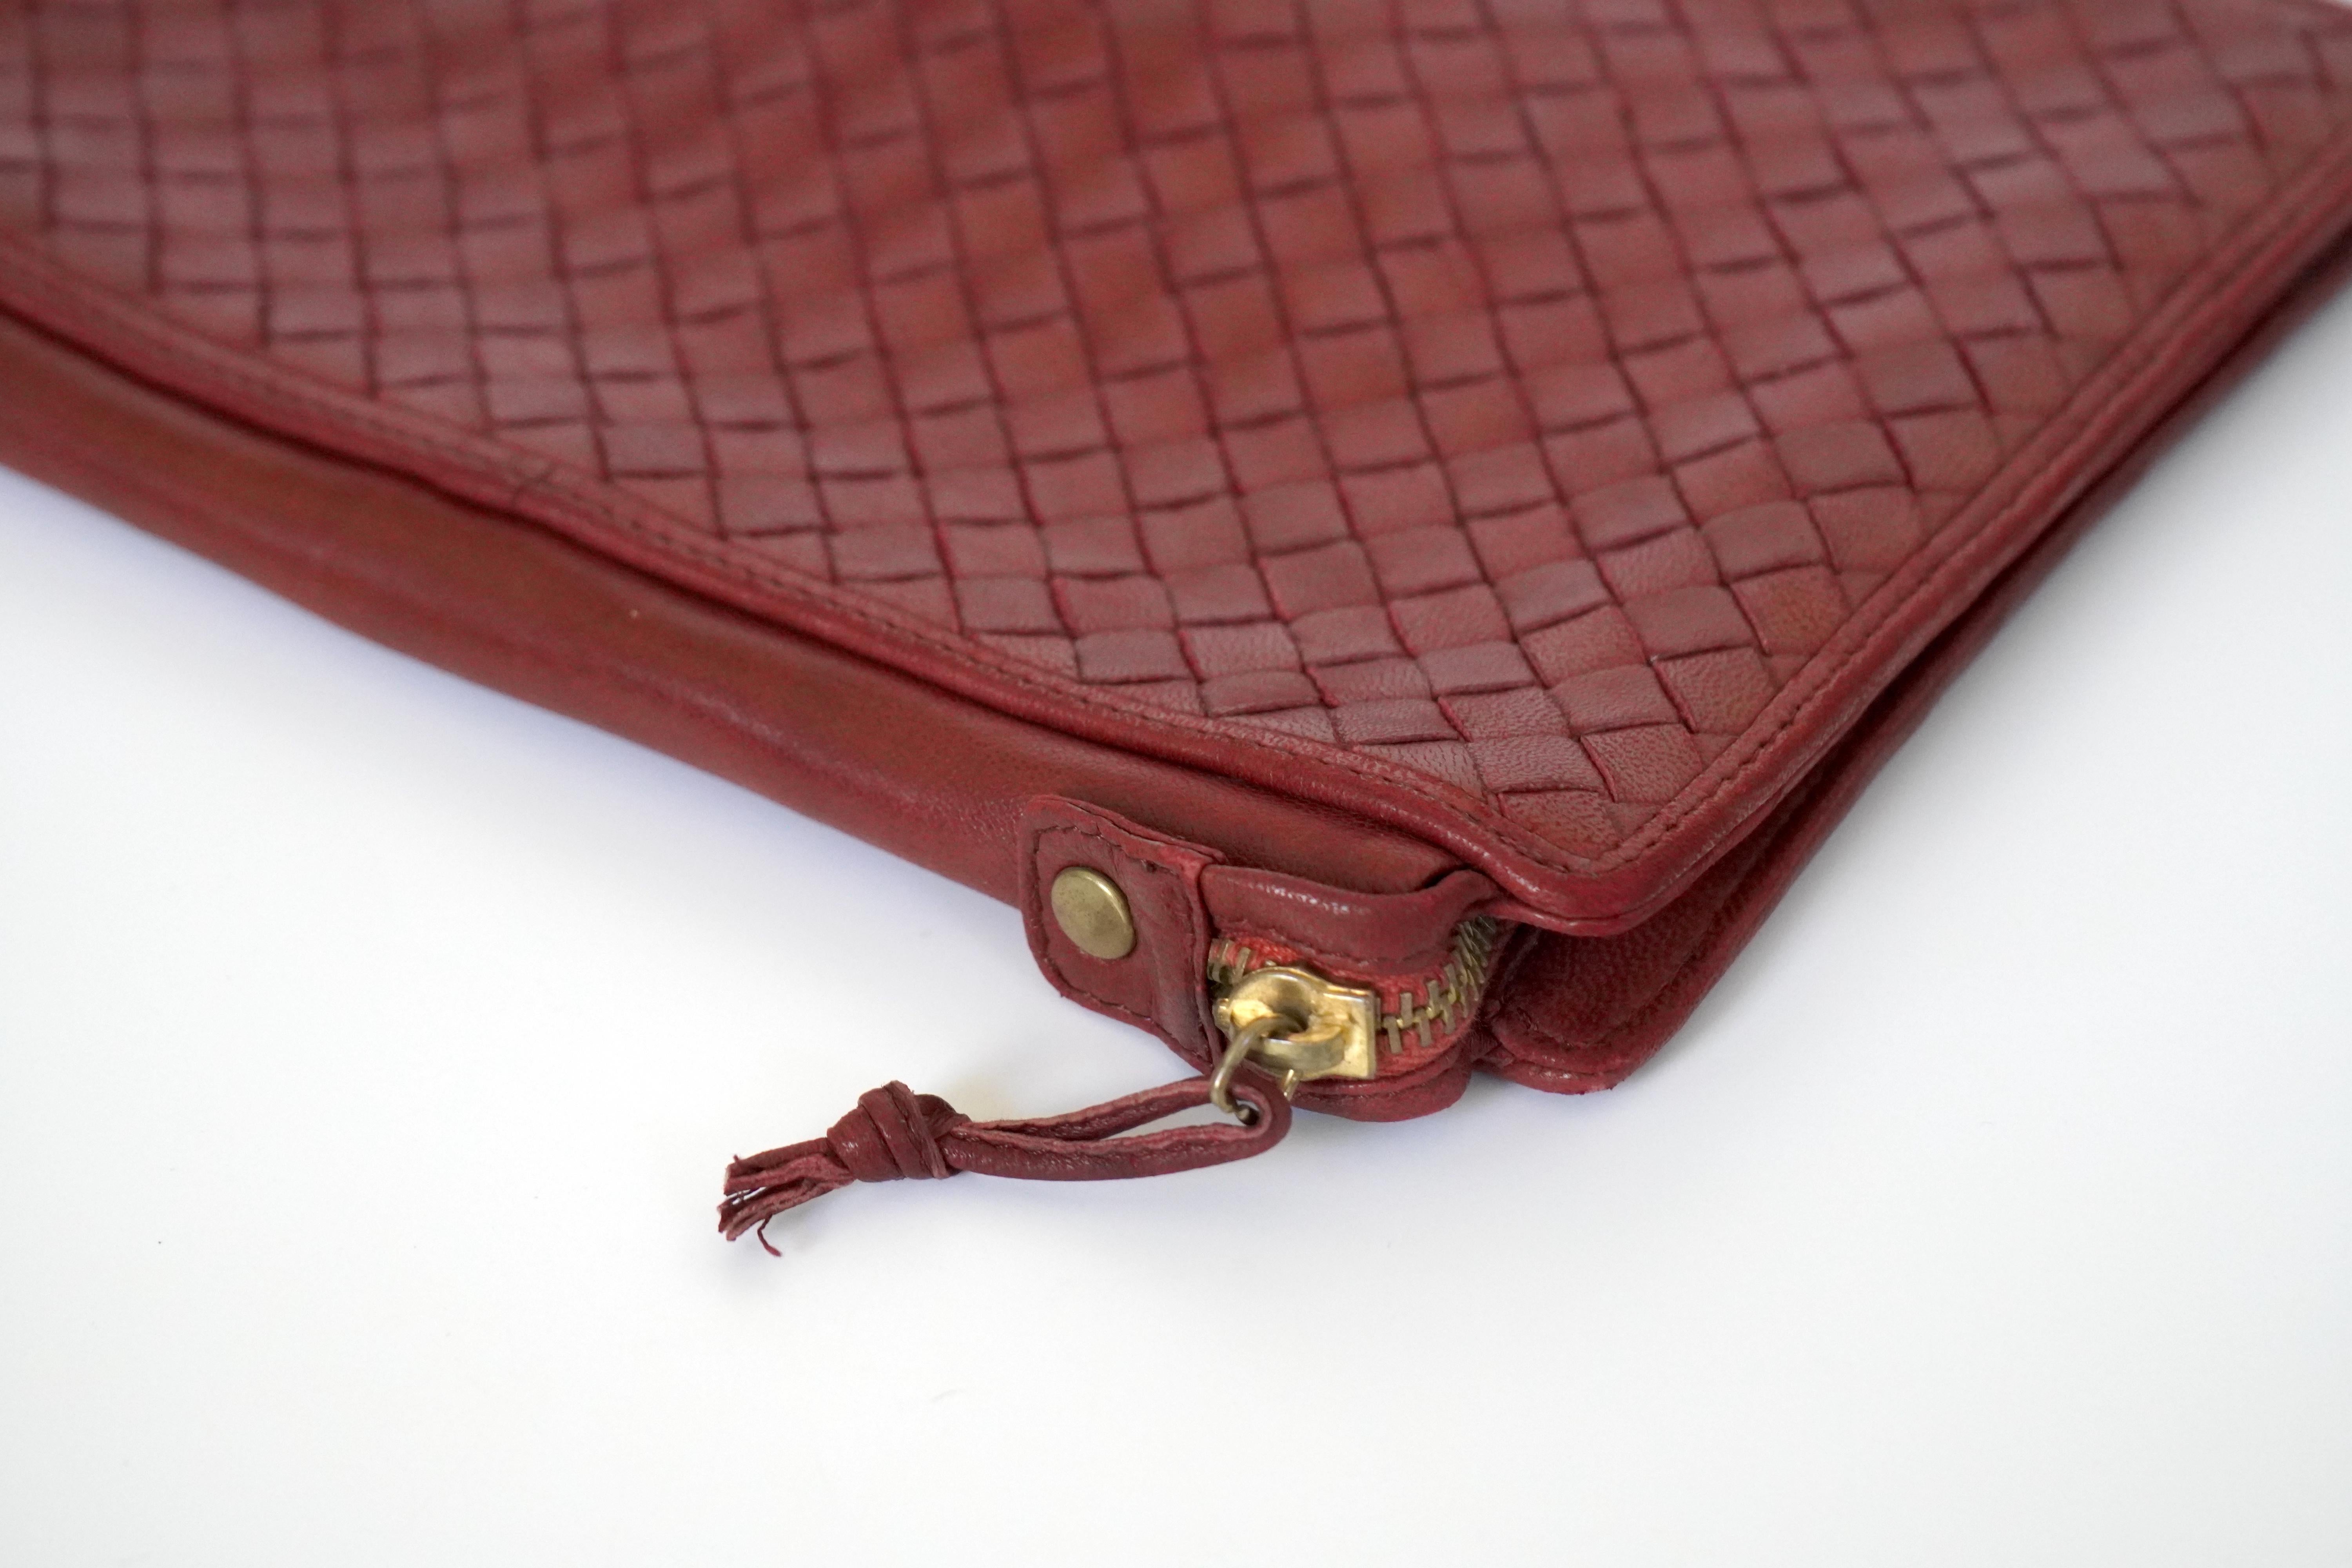 This Bottega Veneta clutch bag, crafted in the iconic Intrecciato weave, exudes sophistication in a subtle dark rosa red hue. Measuring 10 inches by 7 inches, it strikes a balance between style and practicality. The interior reveals a well-designed